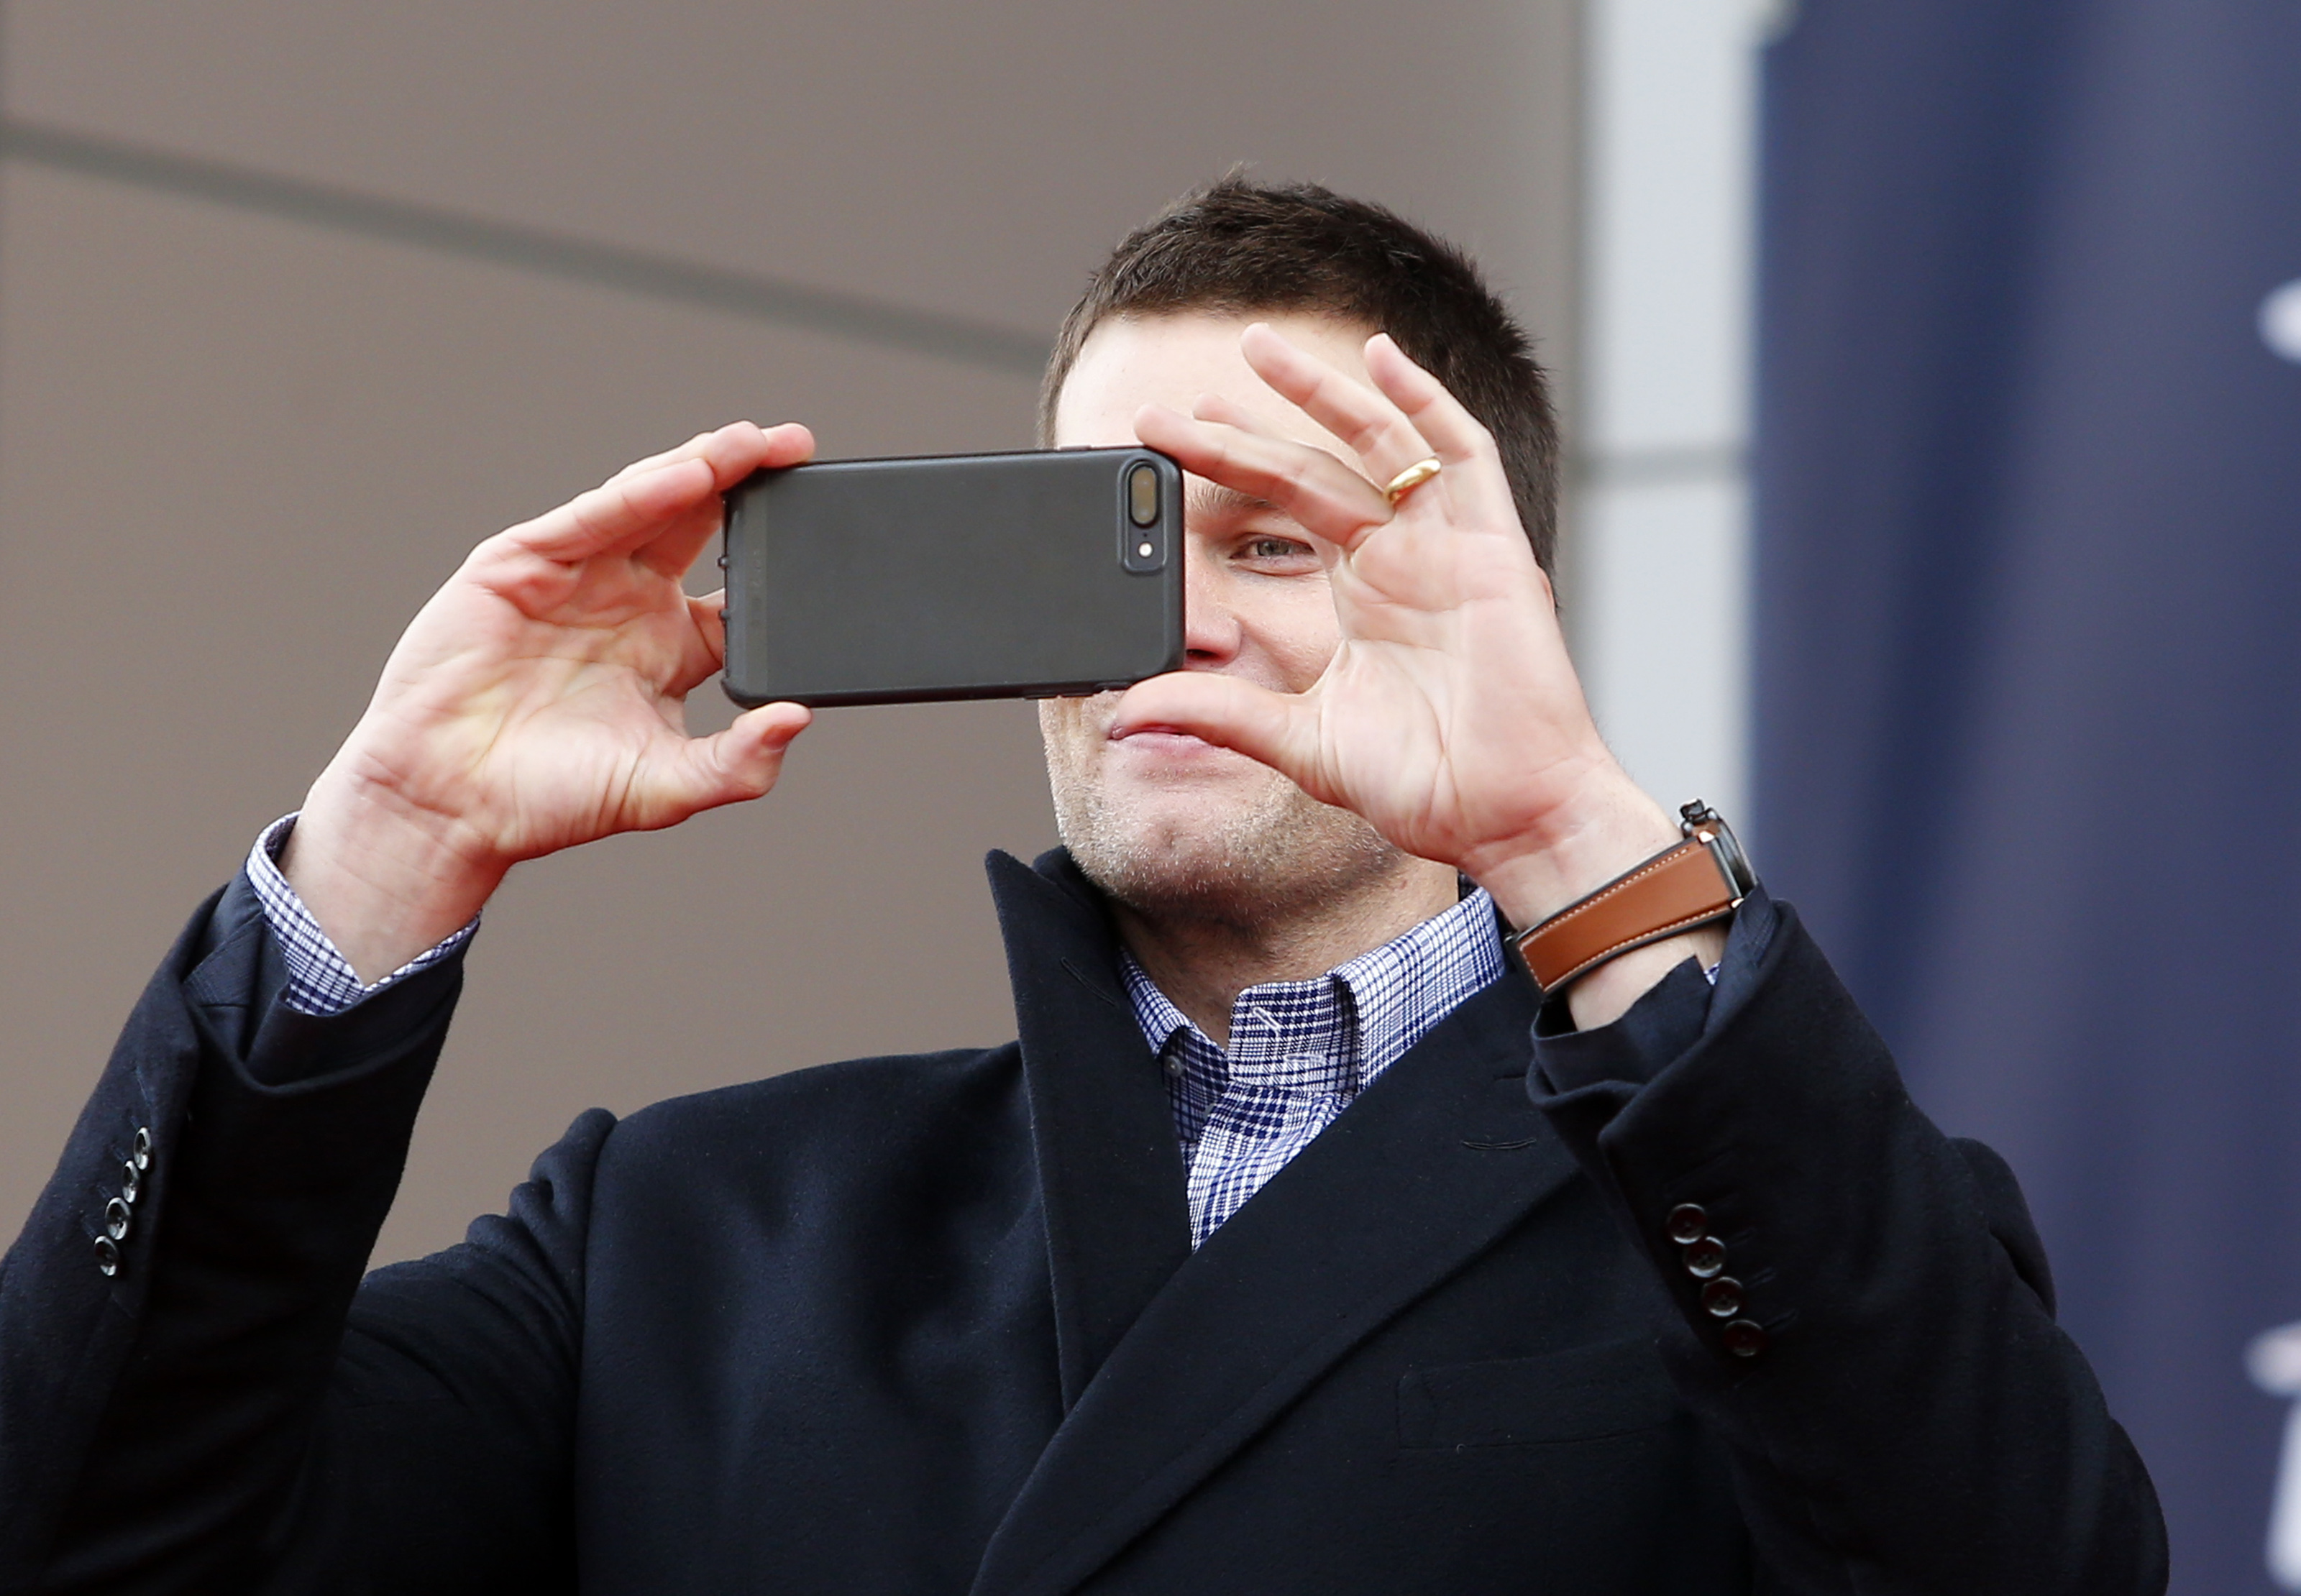 Tom Brady Shows His Real Age With ‘Ancient’ iPhone, Not NFL Career